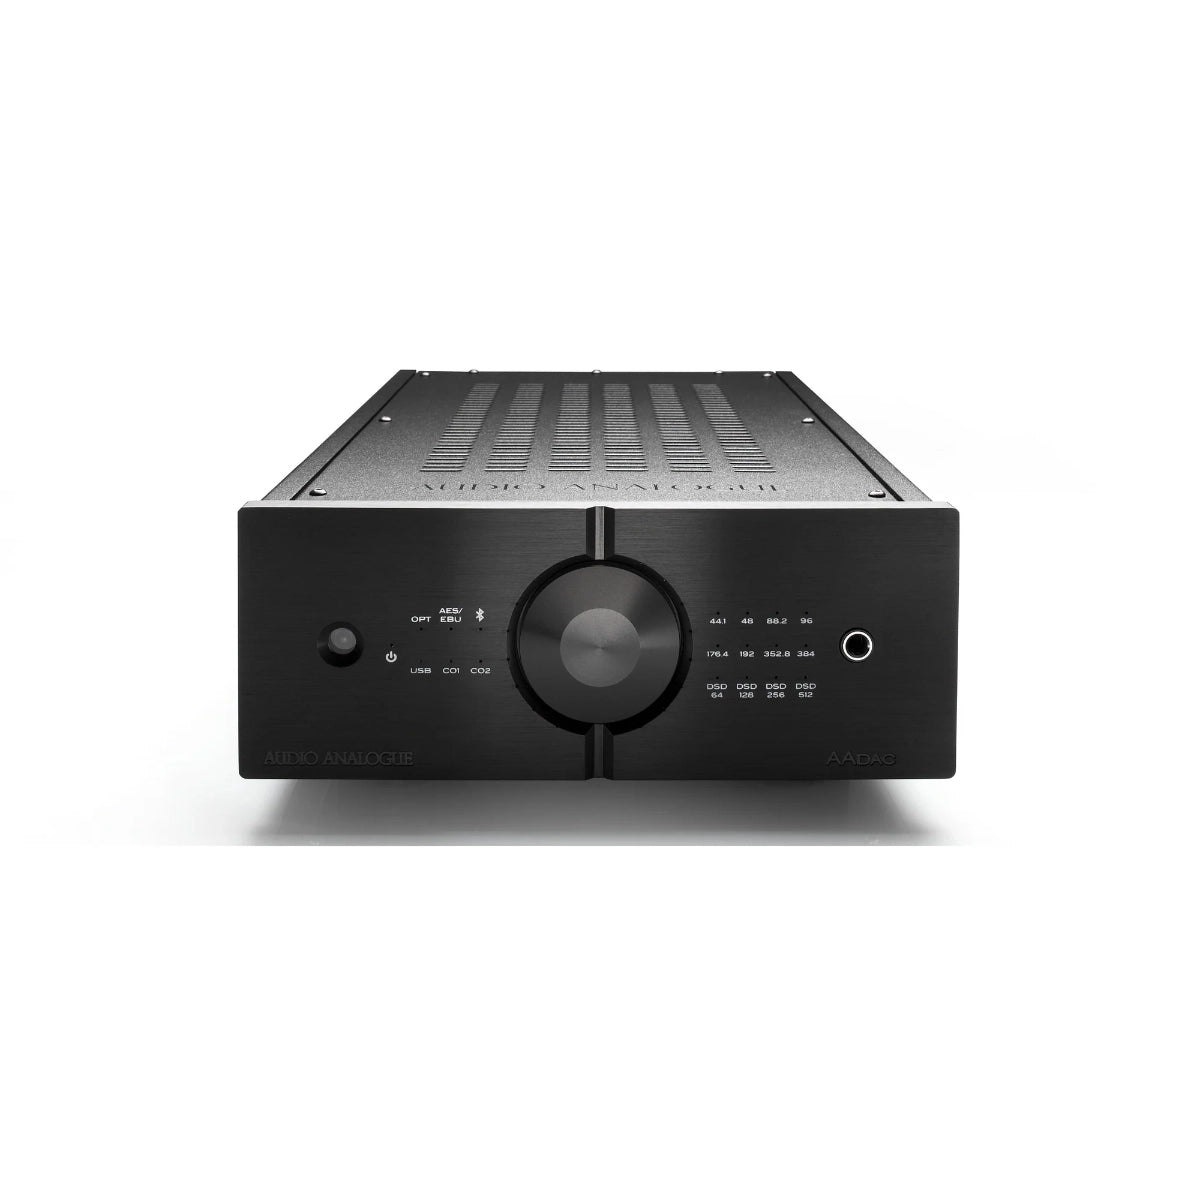 An image of Audio Analogue's AADAC digital to analogue converter in black, with BT.